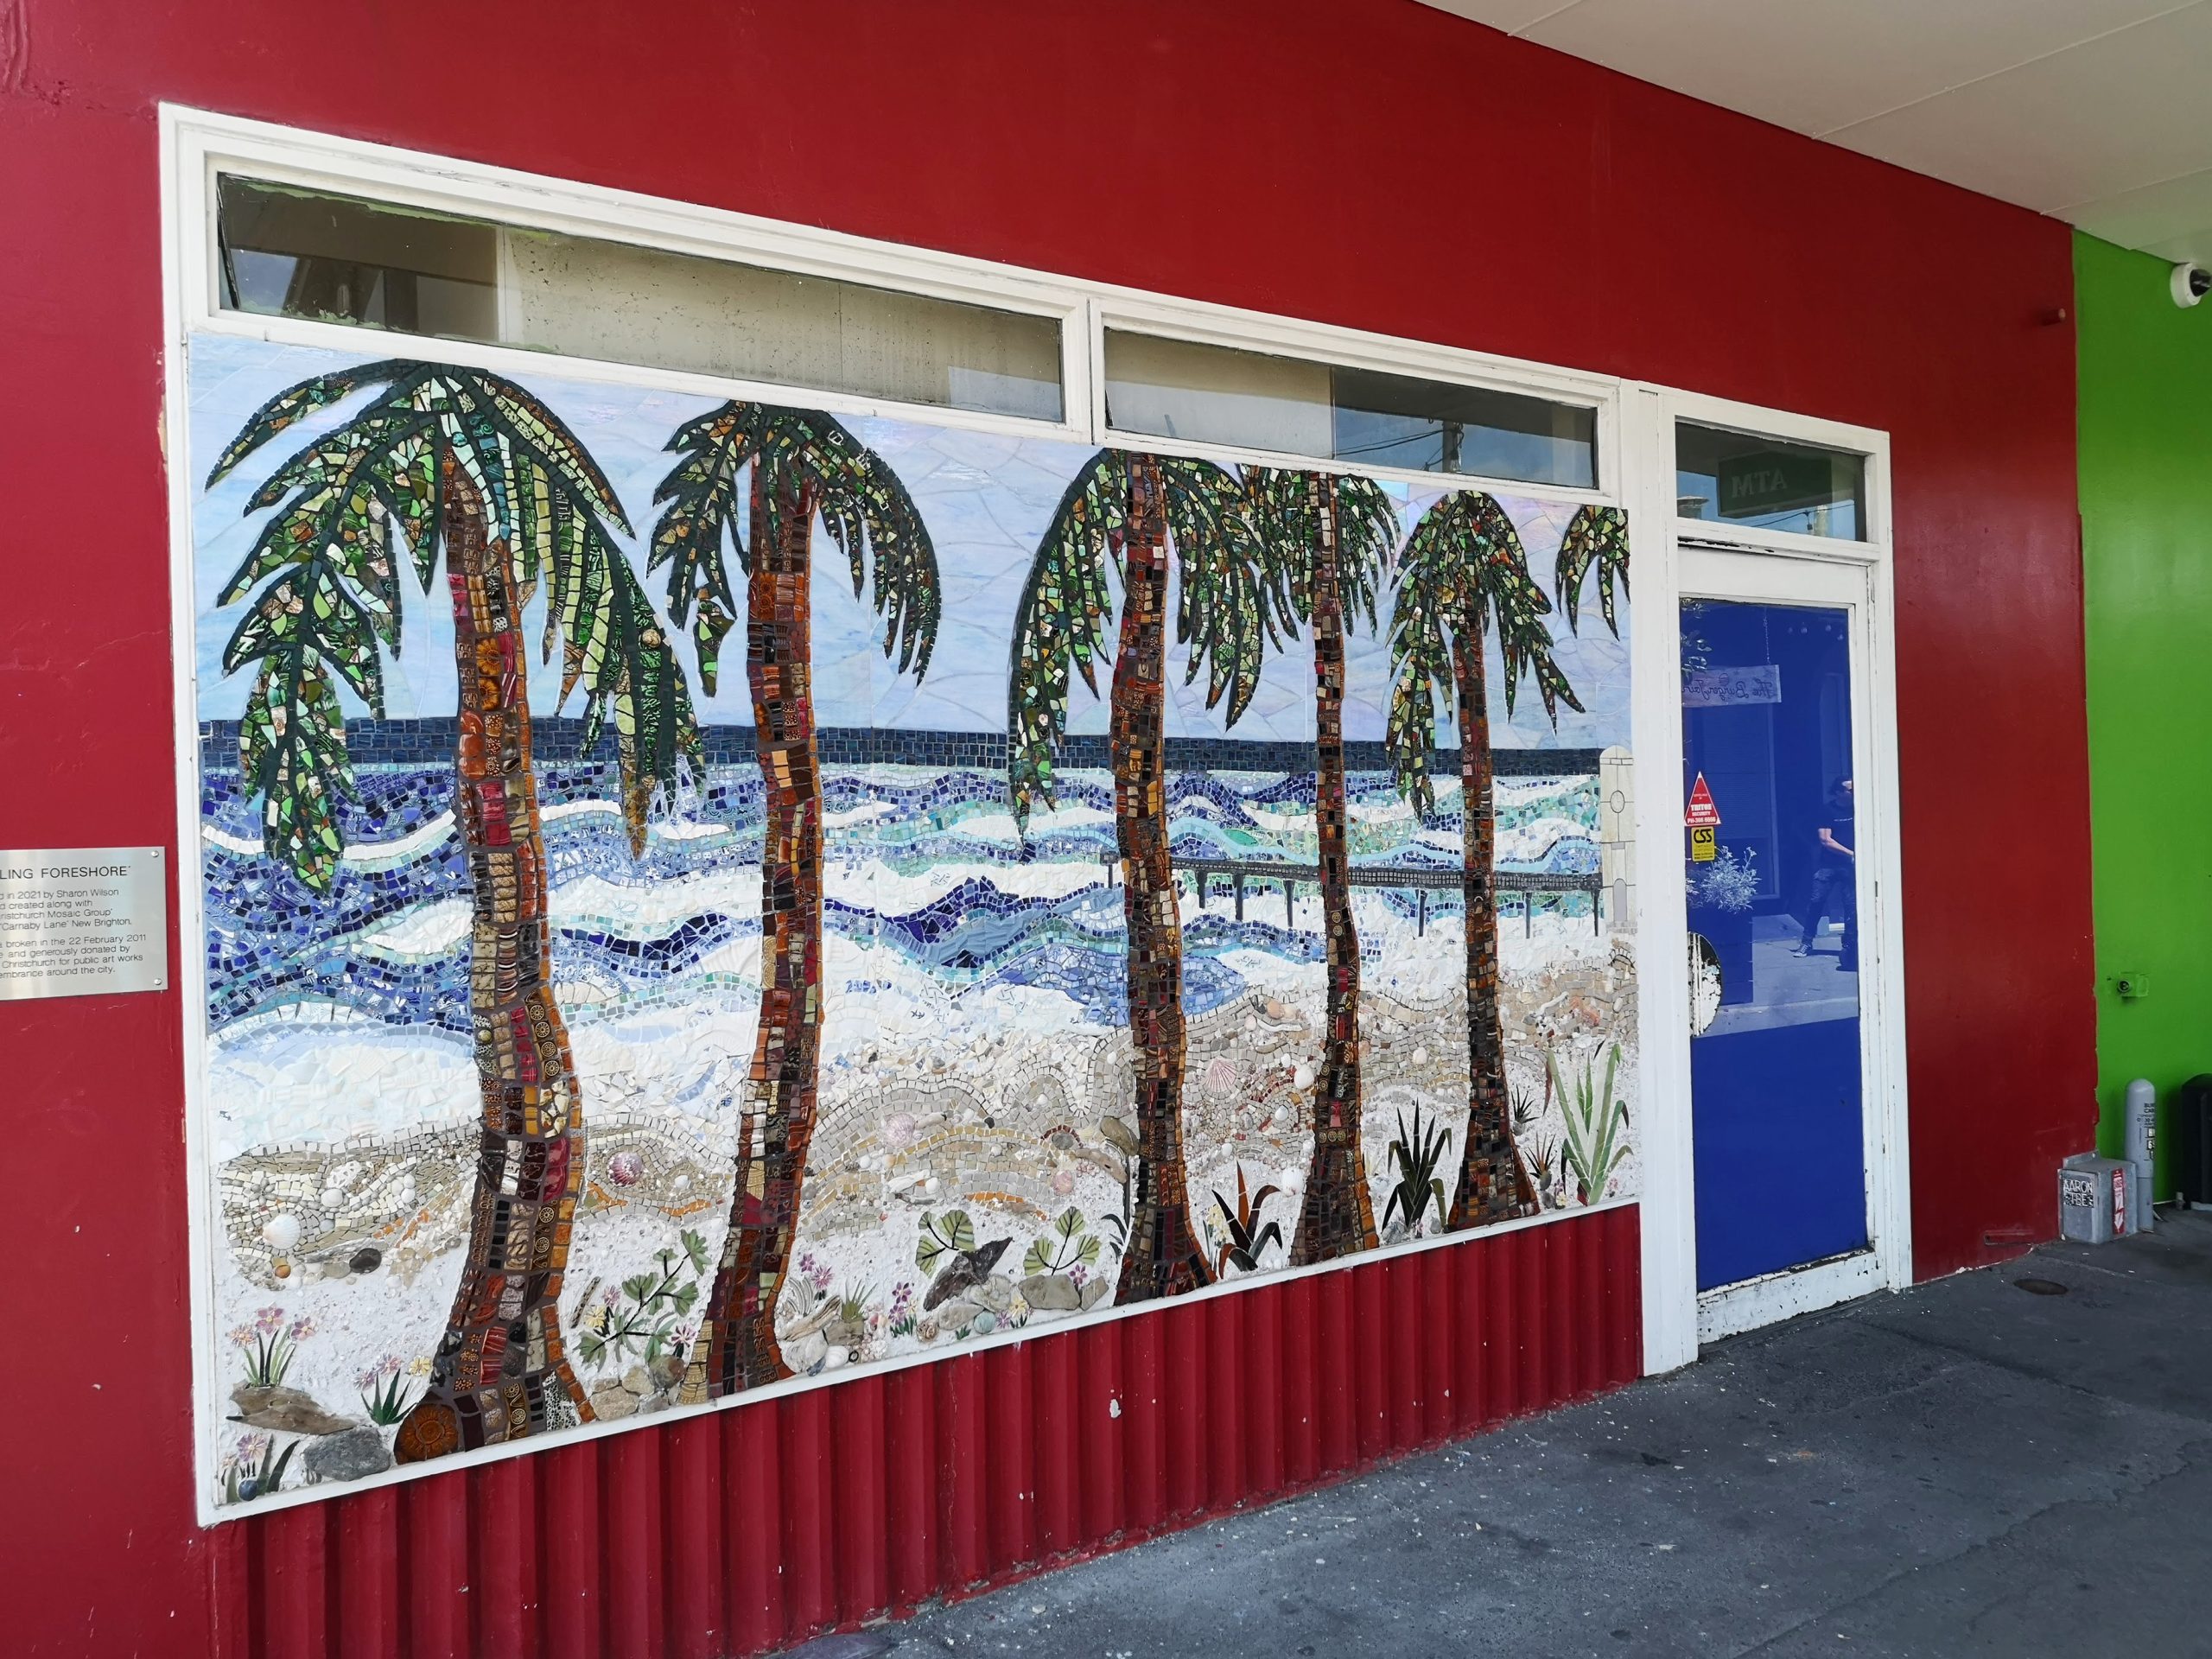 Mosaic mural of palm trees and beach